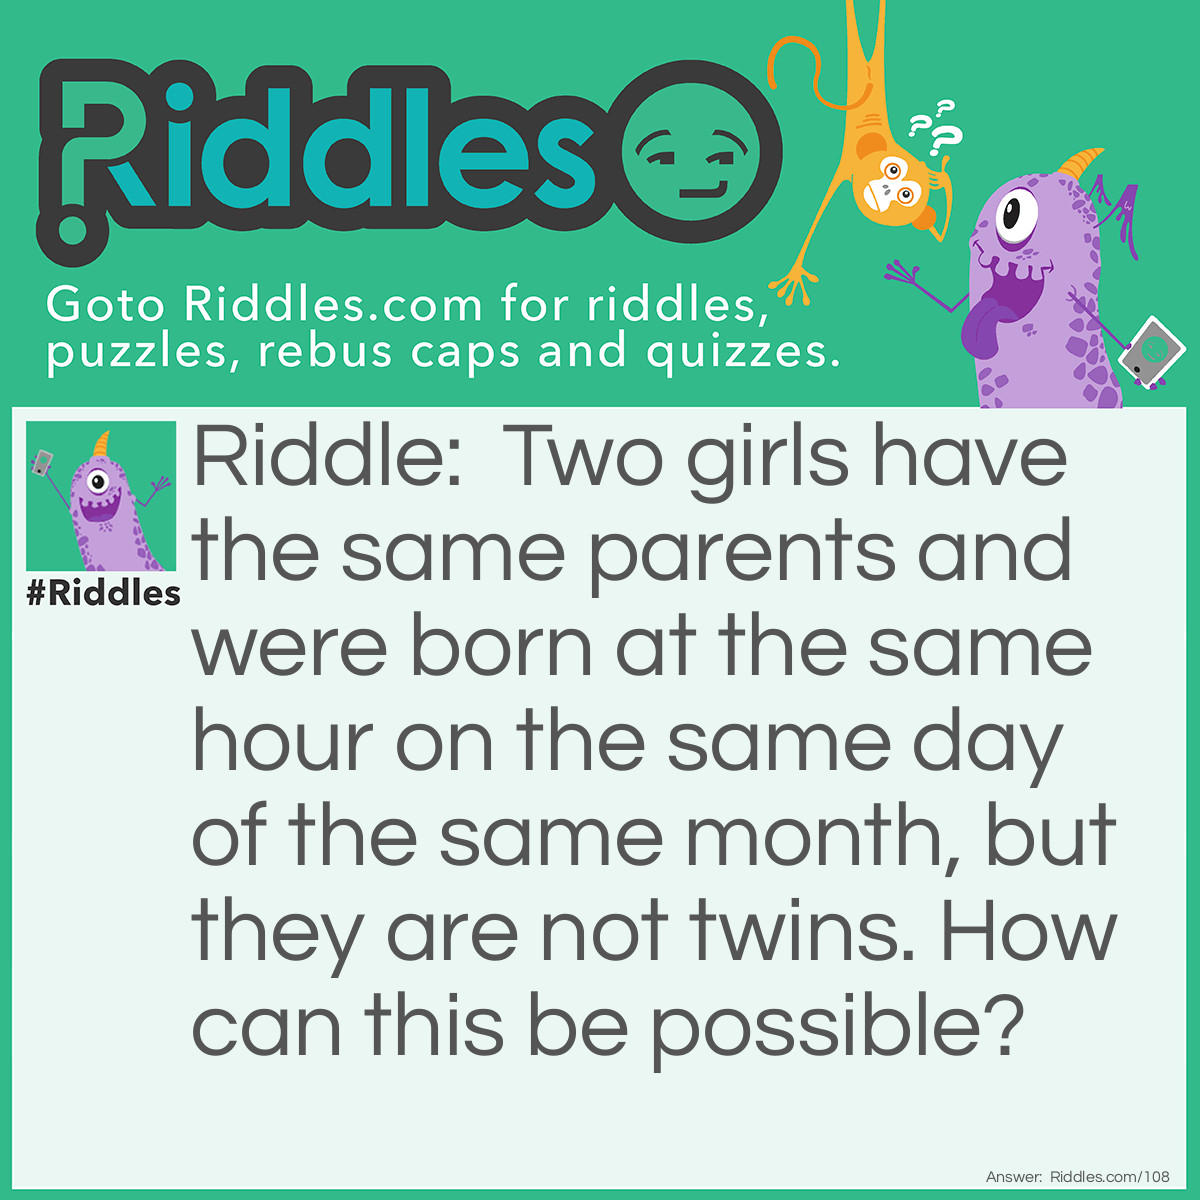 Riddle: Two girls have the same parents and were born at the same hour of the same day of the same month, but they are not twins. How can this be possible? Answer: They were not born in the same year.